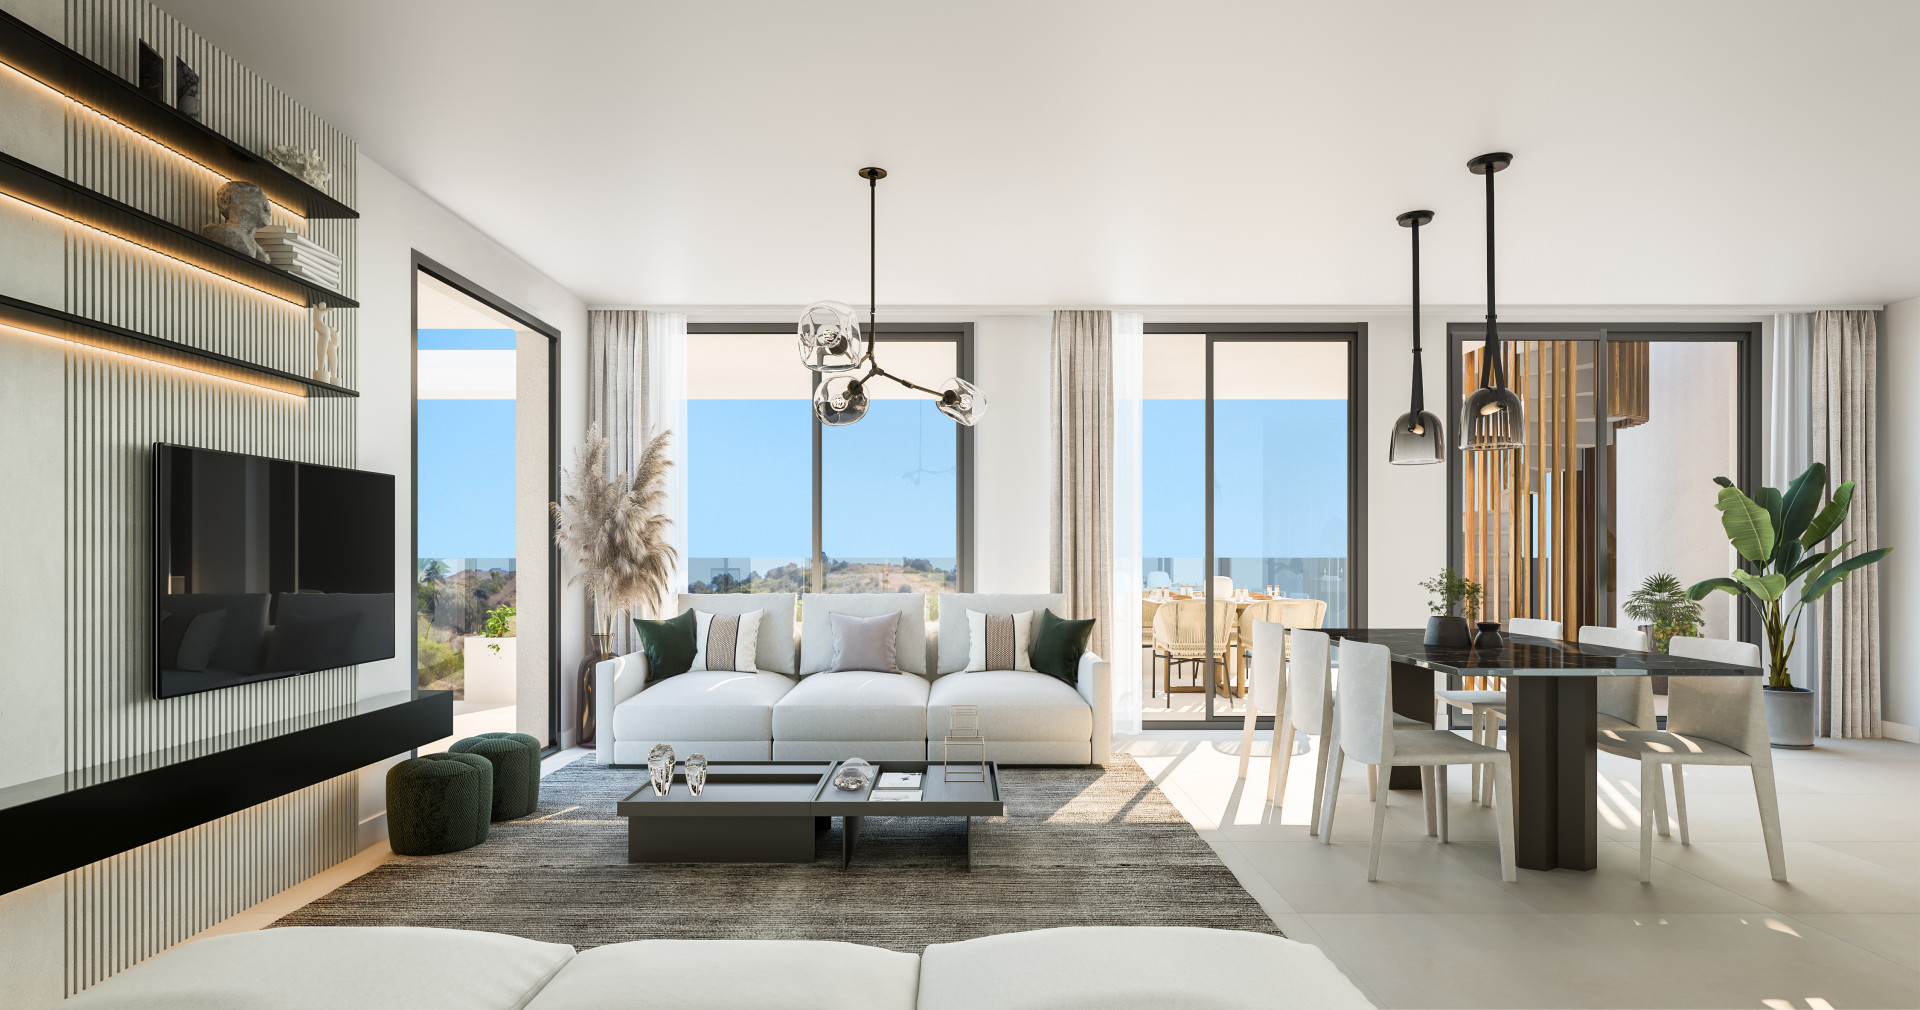 New project of modern apartments, penthouses and townhouses for sale in Fuengirola